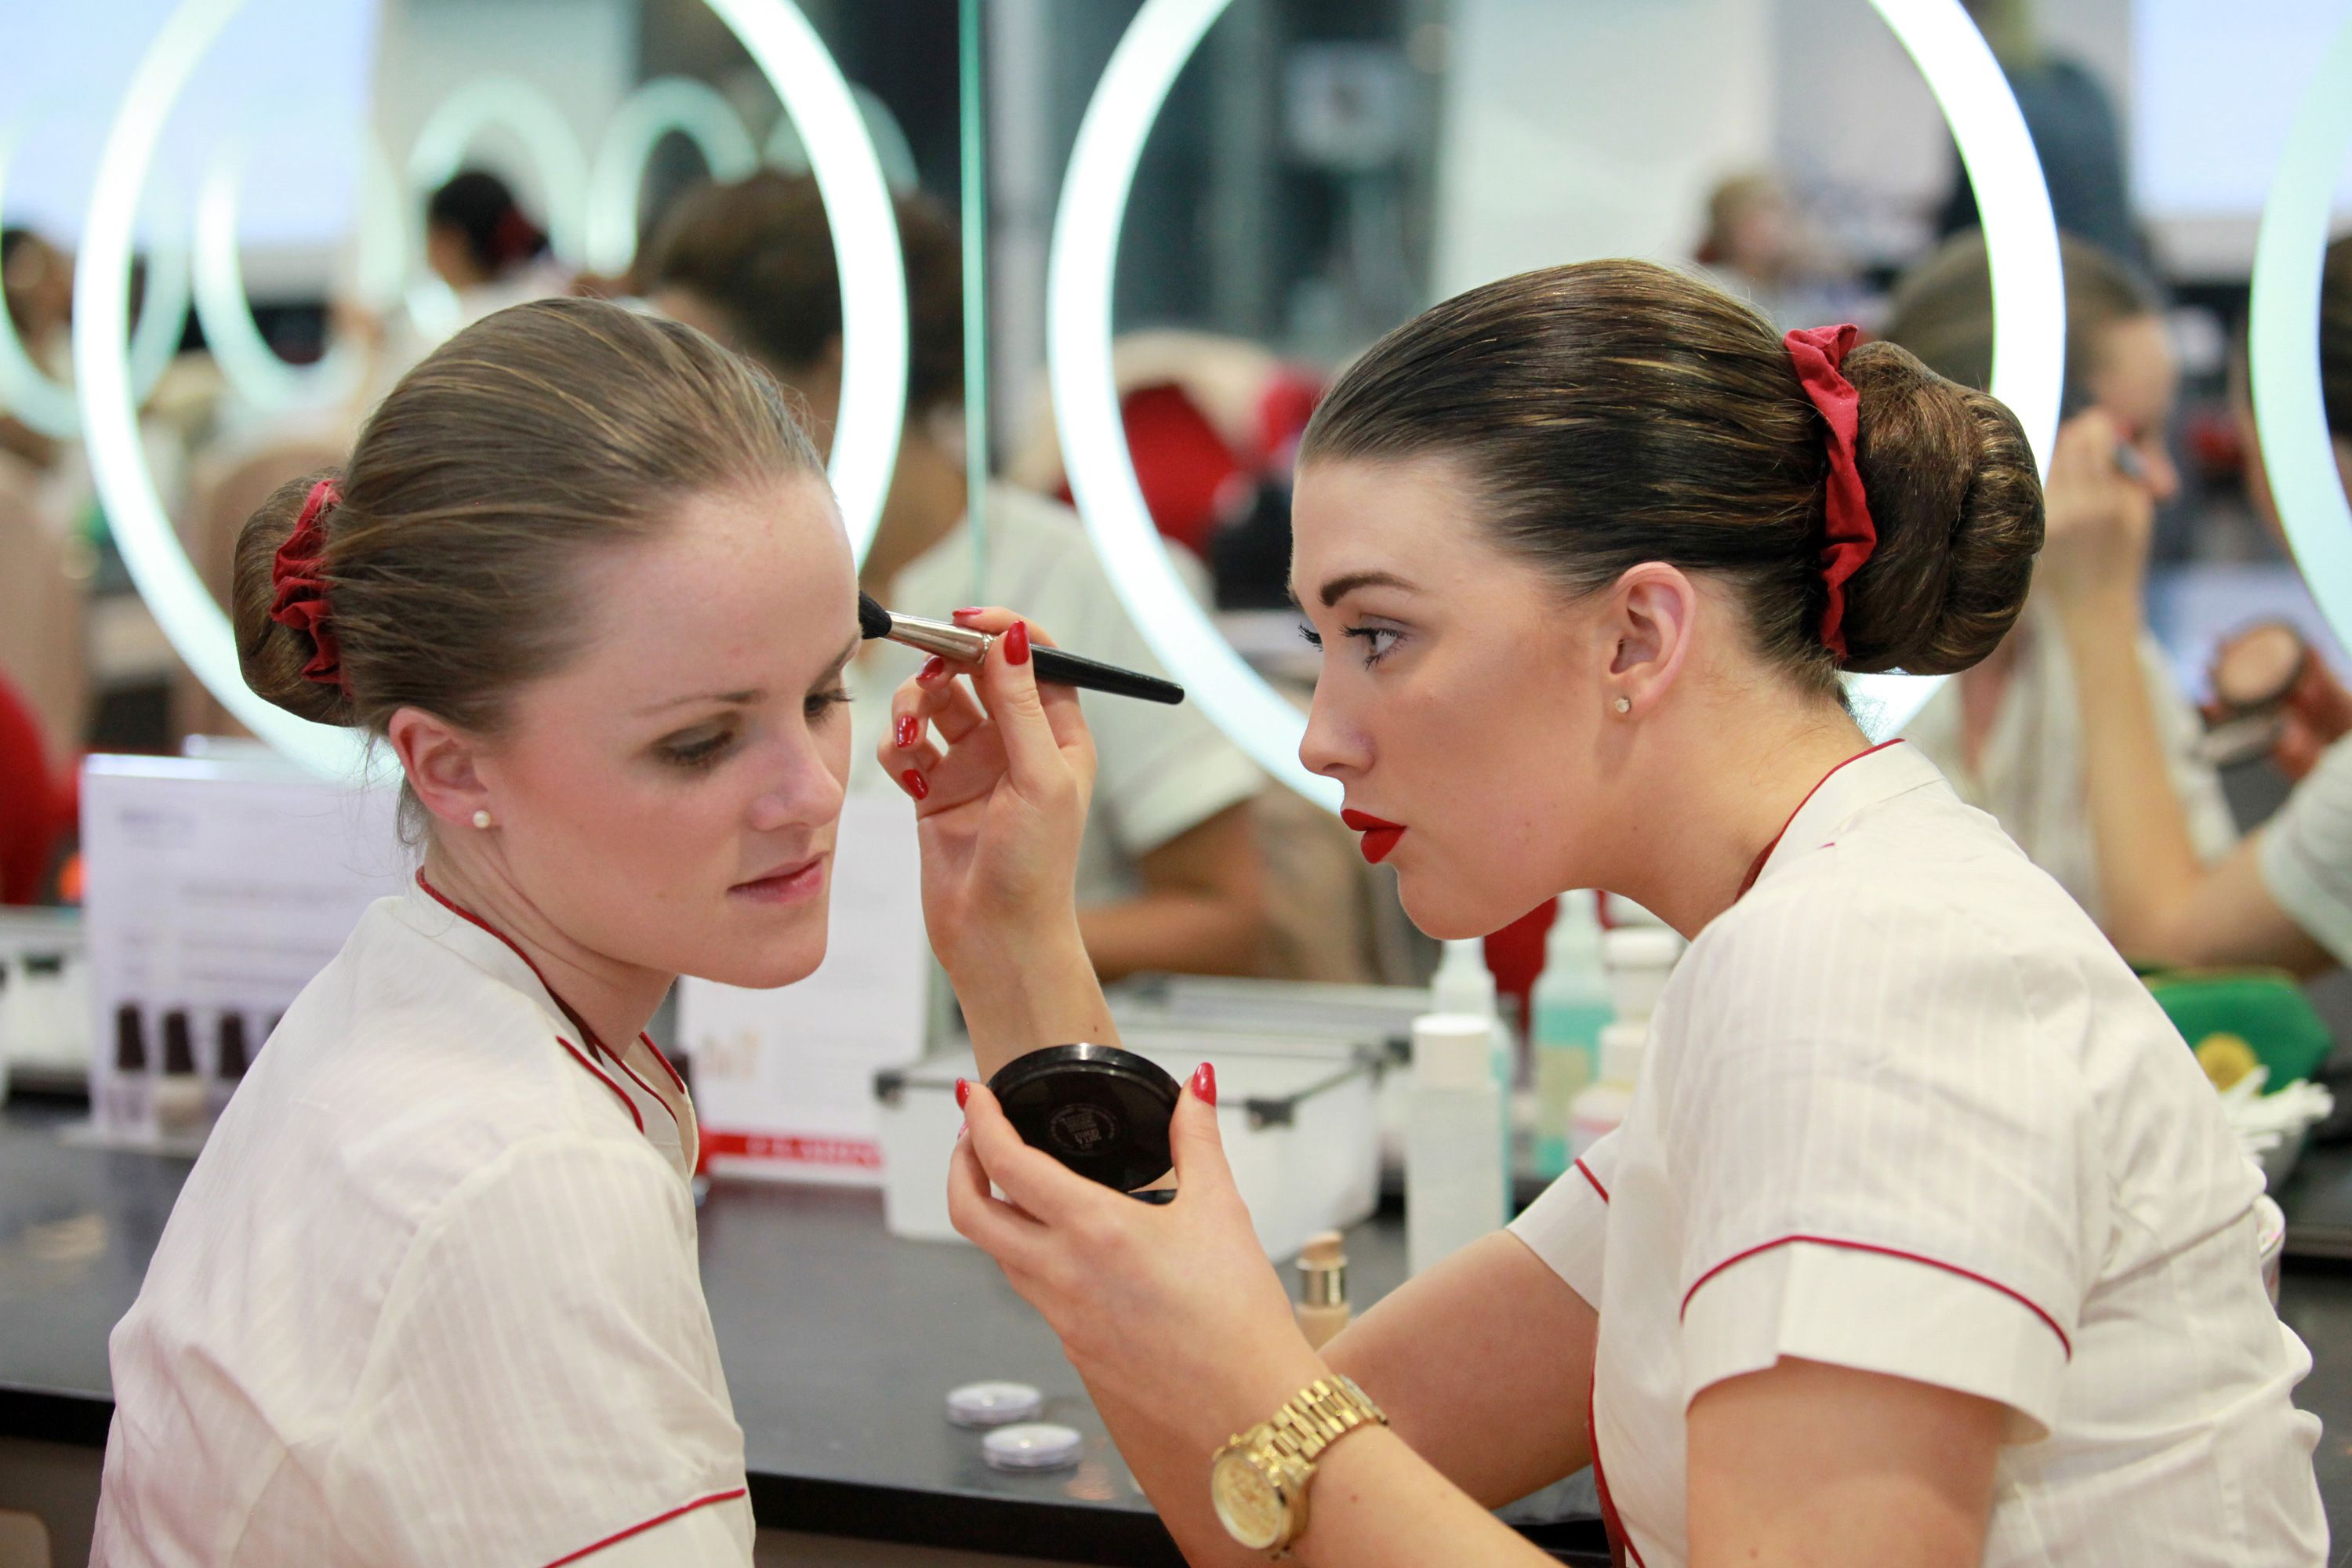 Emirates Cabin Crew Interview - How Do You Become a First Class Flight  Attendant?